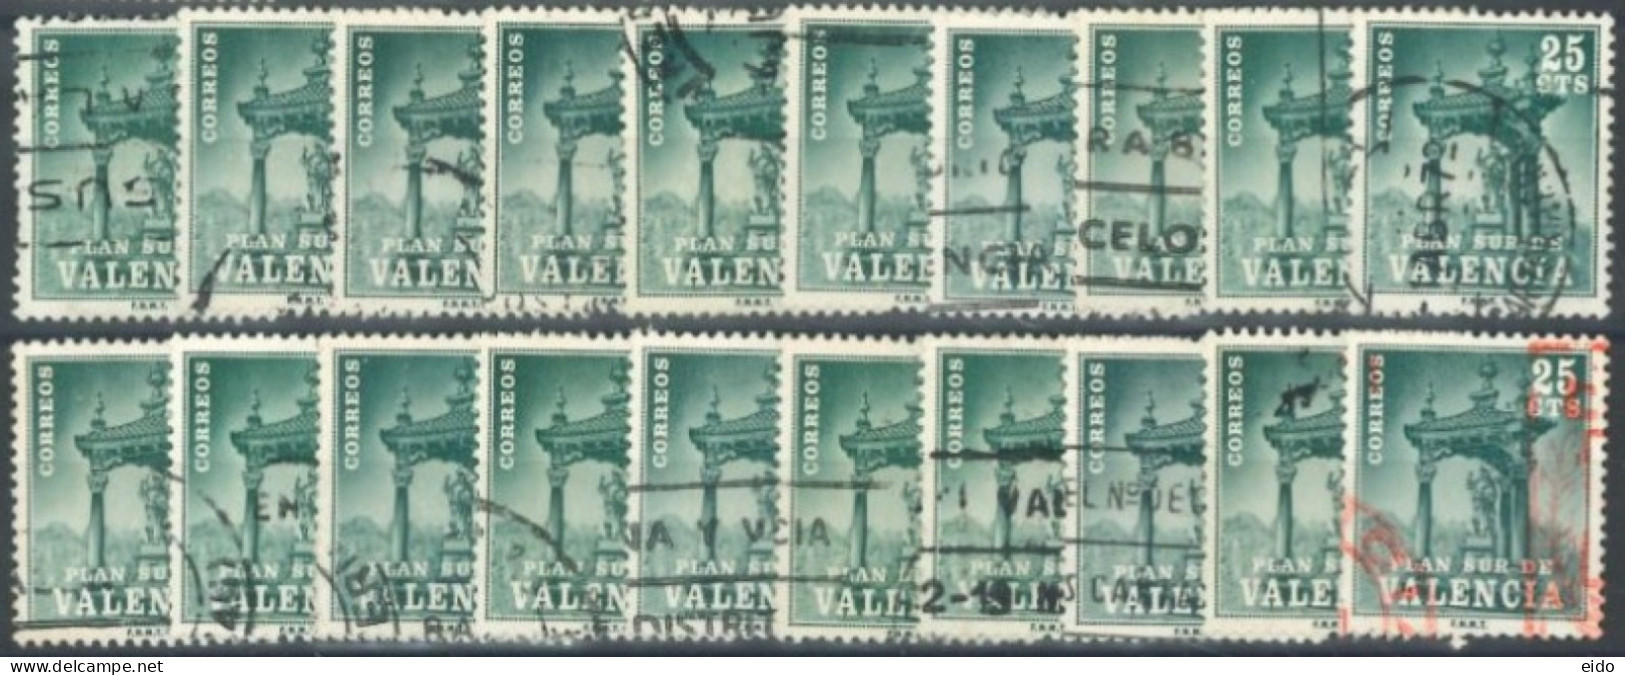 SPAIN, VALENCIA STAMP QTY. 20 DISCOUNTED (SPECIAL PRICE), USED. - Usados